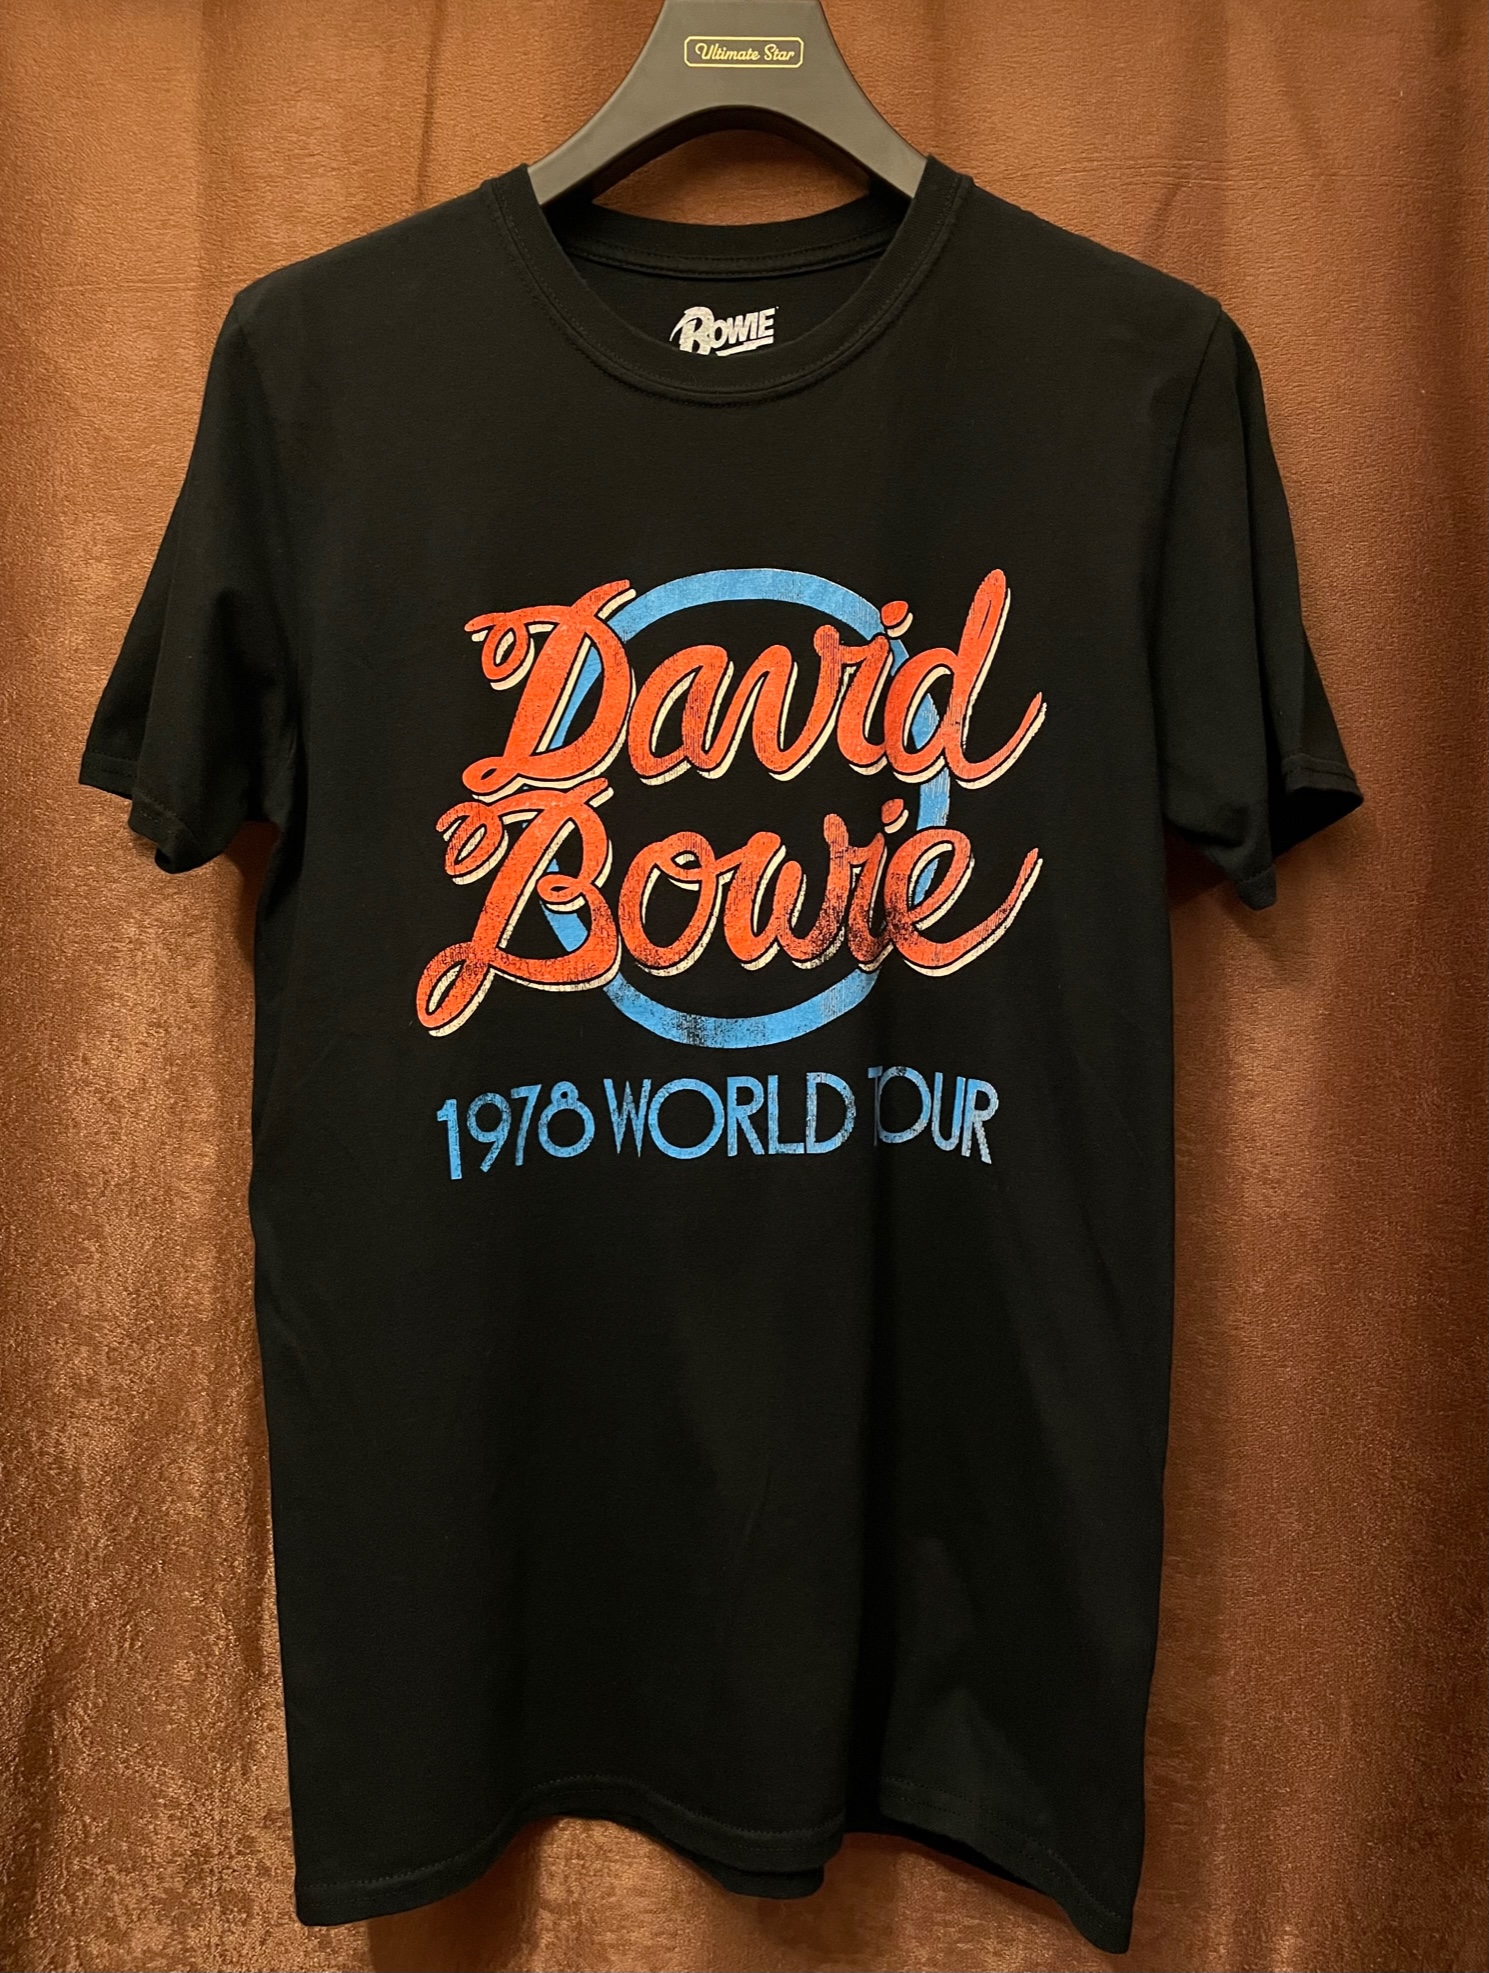 MADE IN UK製 David Bowie 1978 WORLD TOUR ロゴプリントTシャツ ...